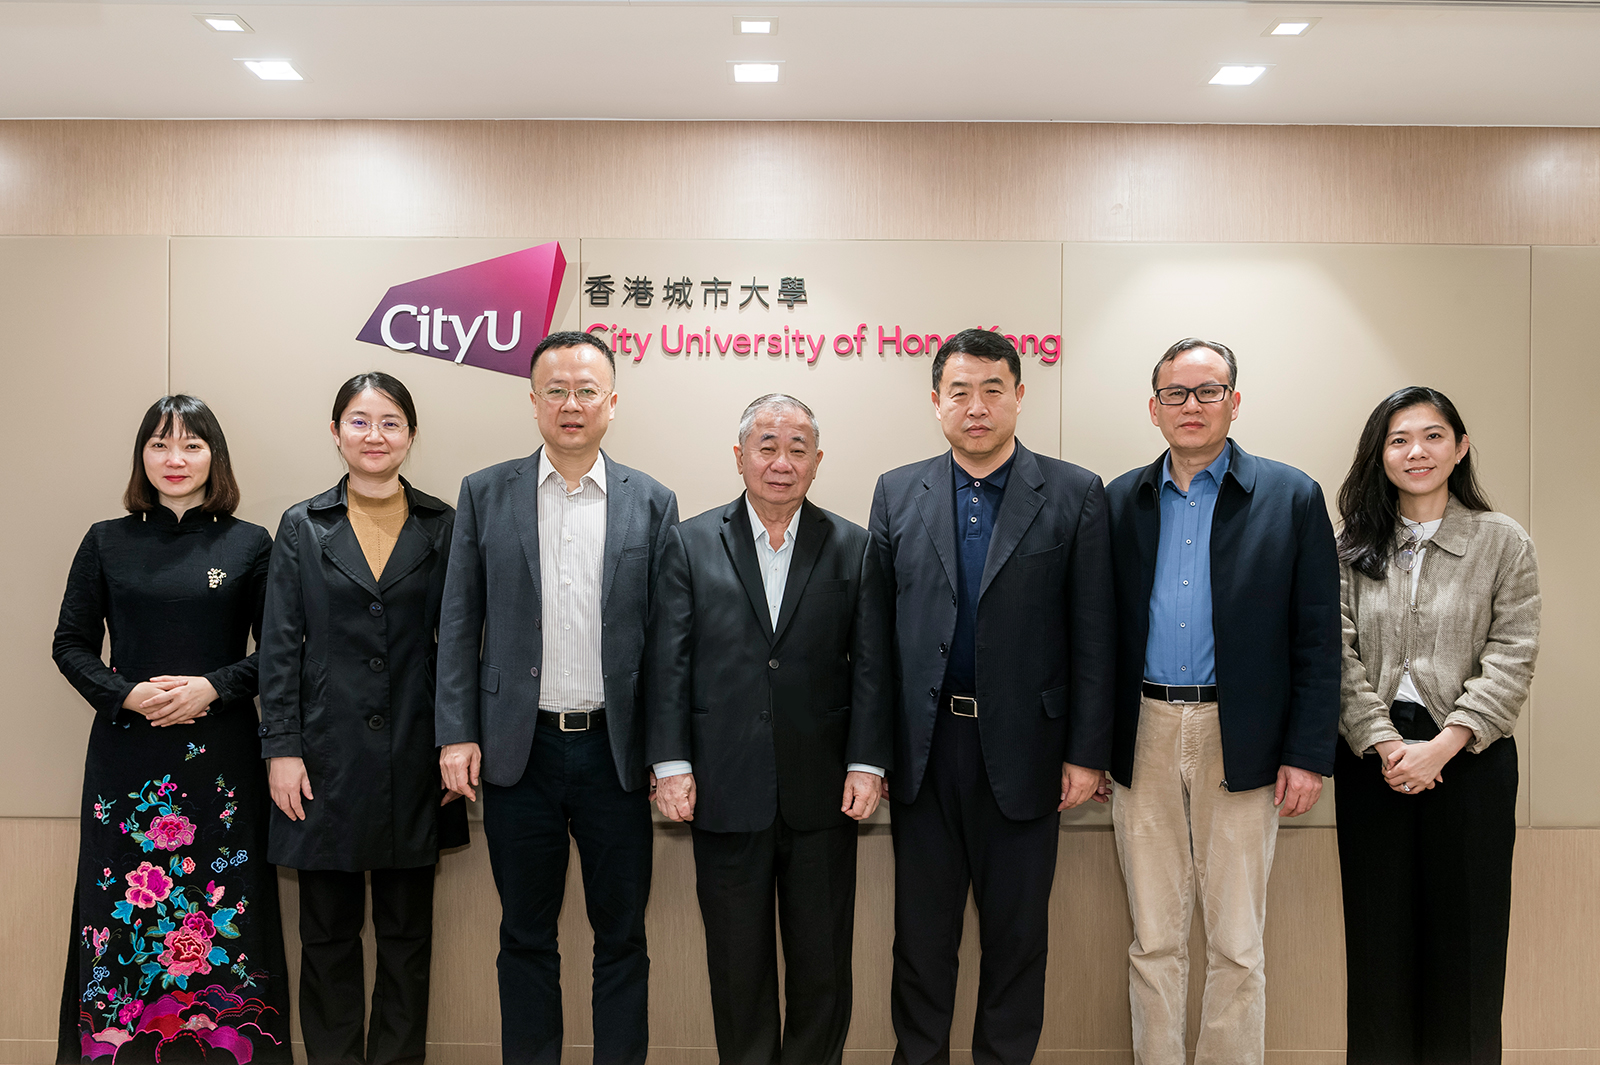 CityUHK’s senior leadership team, including President Boey (centre), receive a delegation led by Mr Zhu Jianhua (third from left).